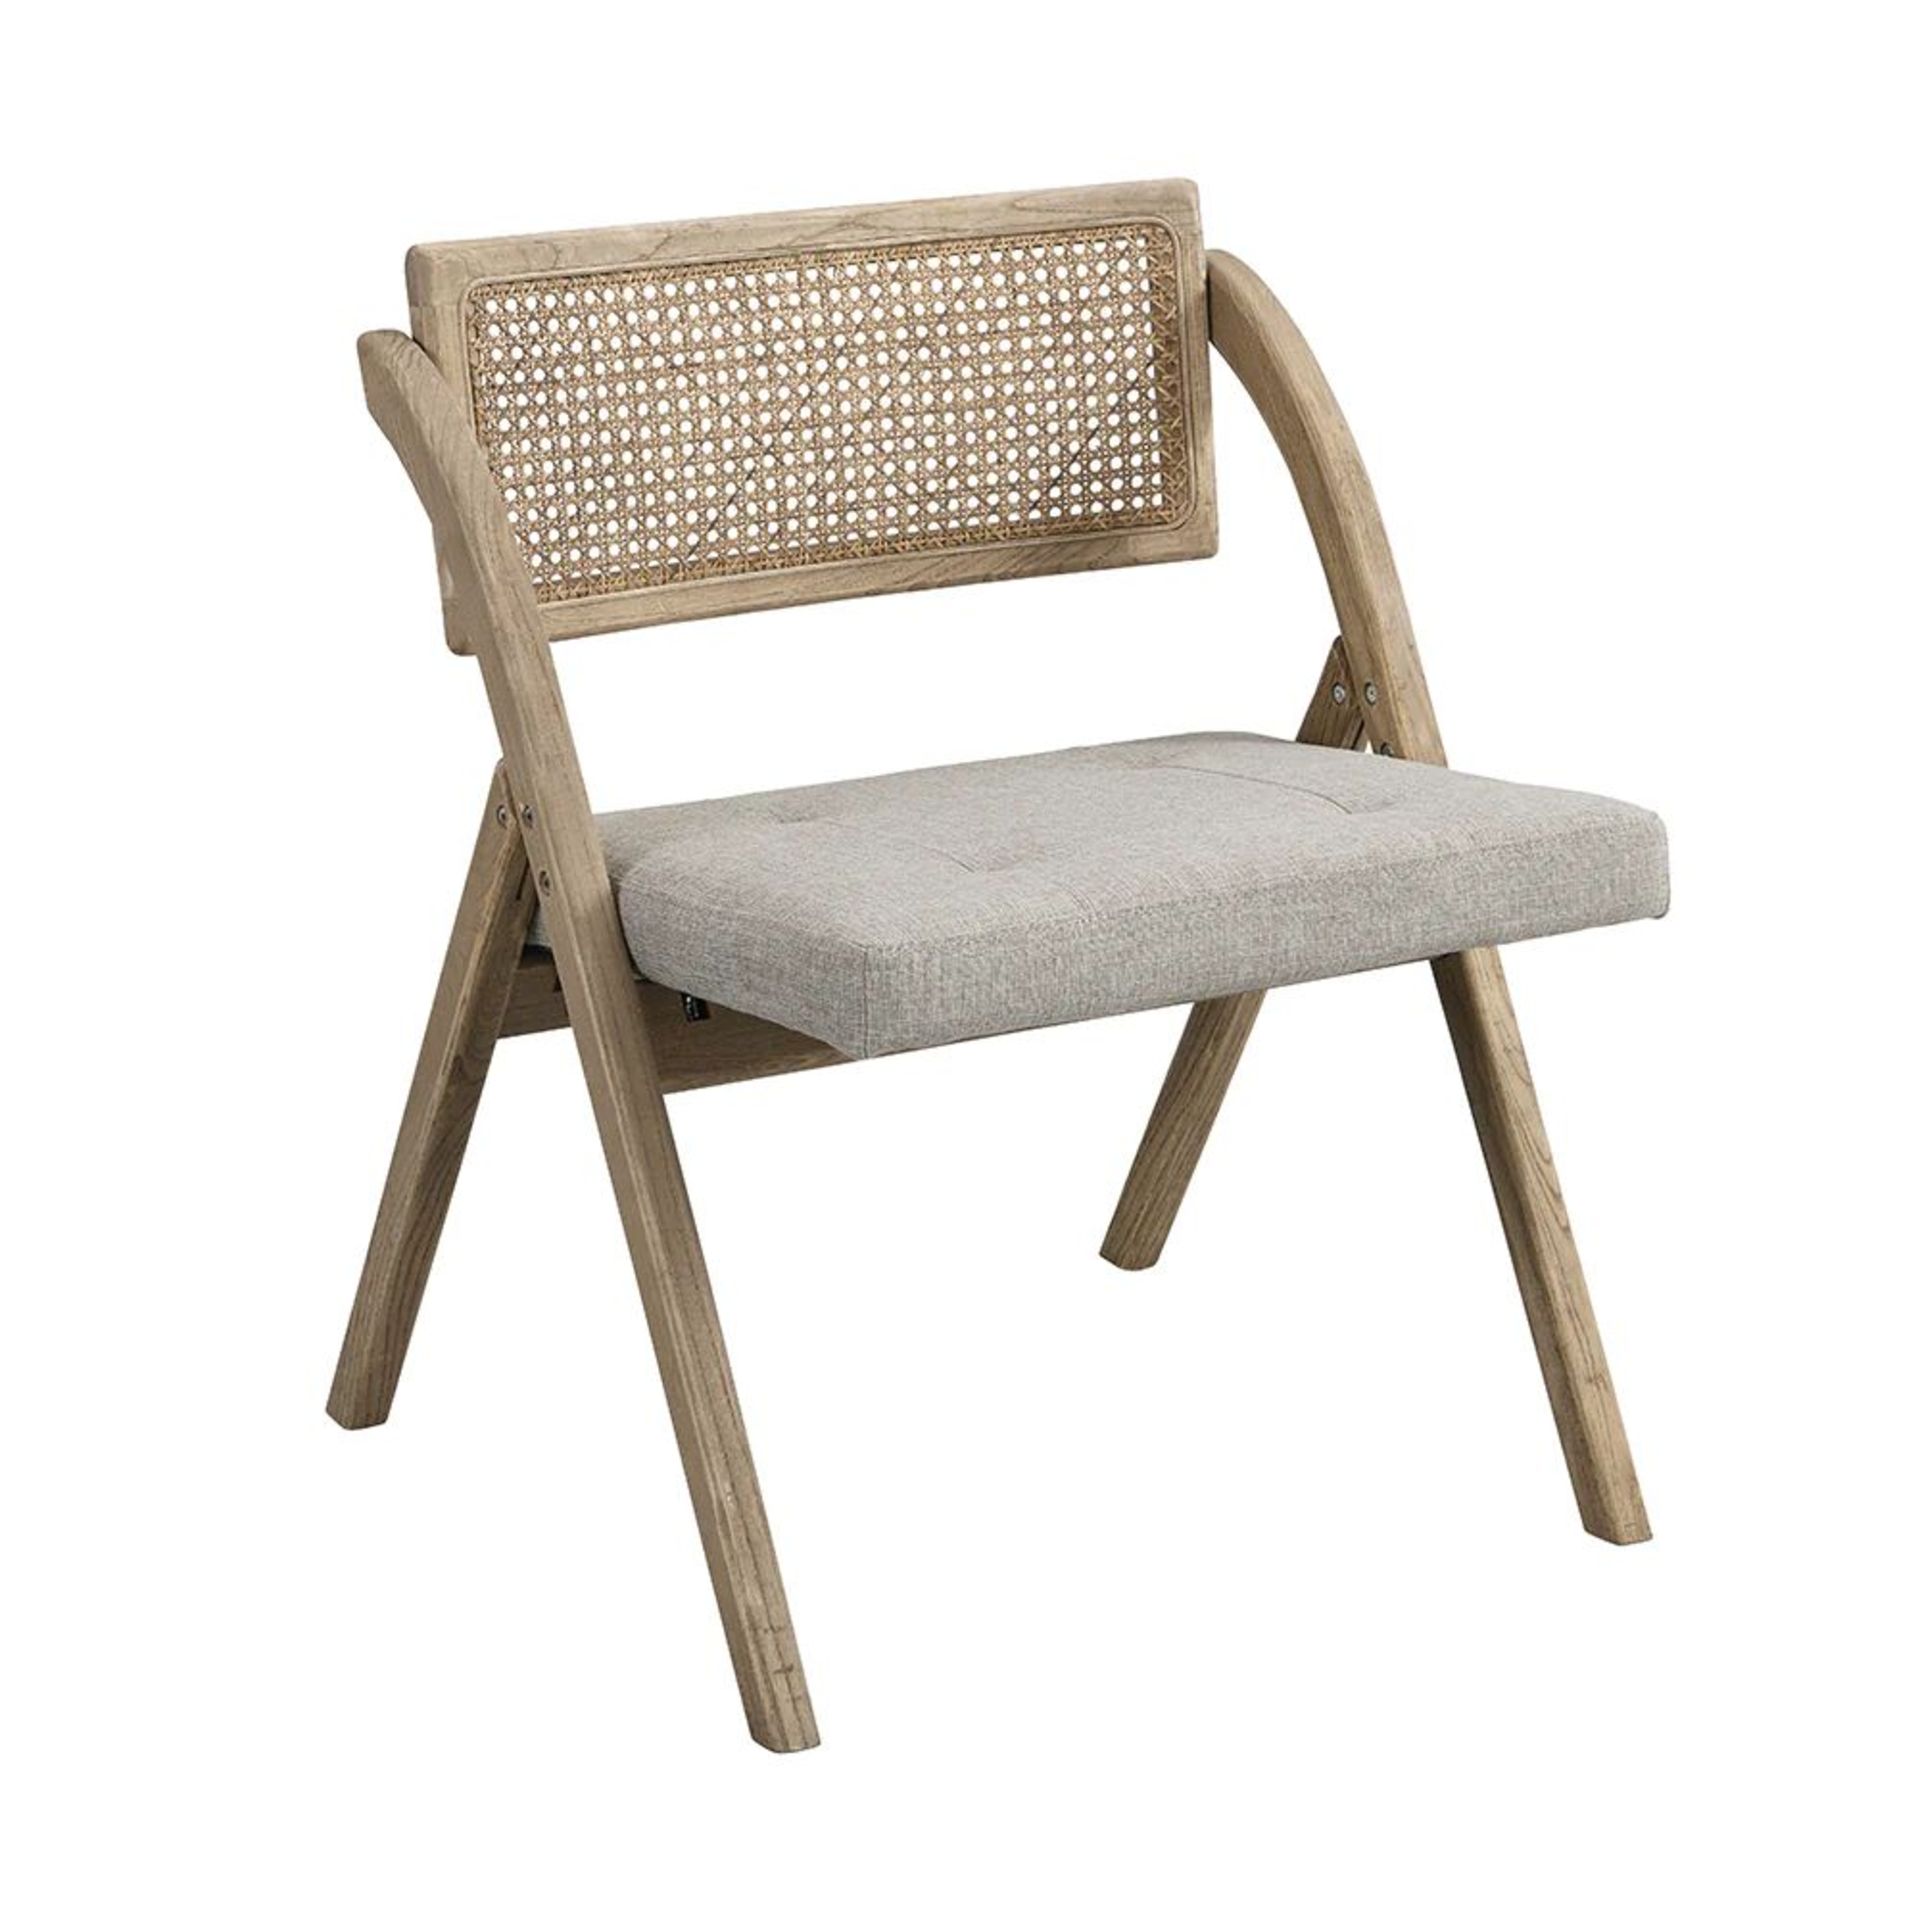 Bordon Natural Cane Rattan Folding Chair with Grey Upholstered Seat. -Er30. RRP £189.99. Made from - Bild 2 aus 2